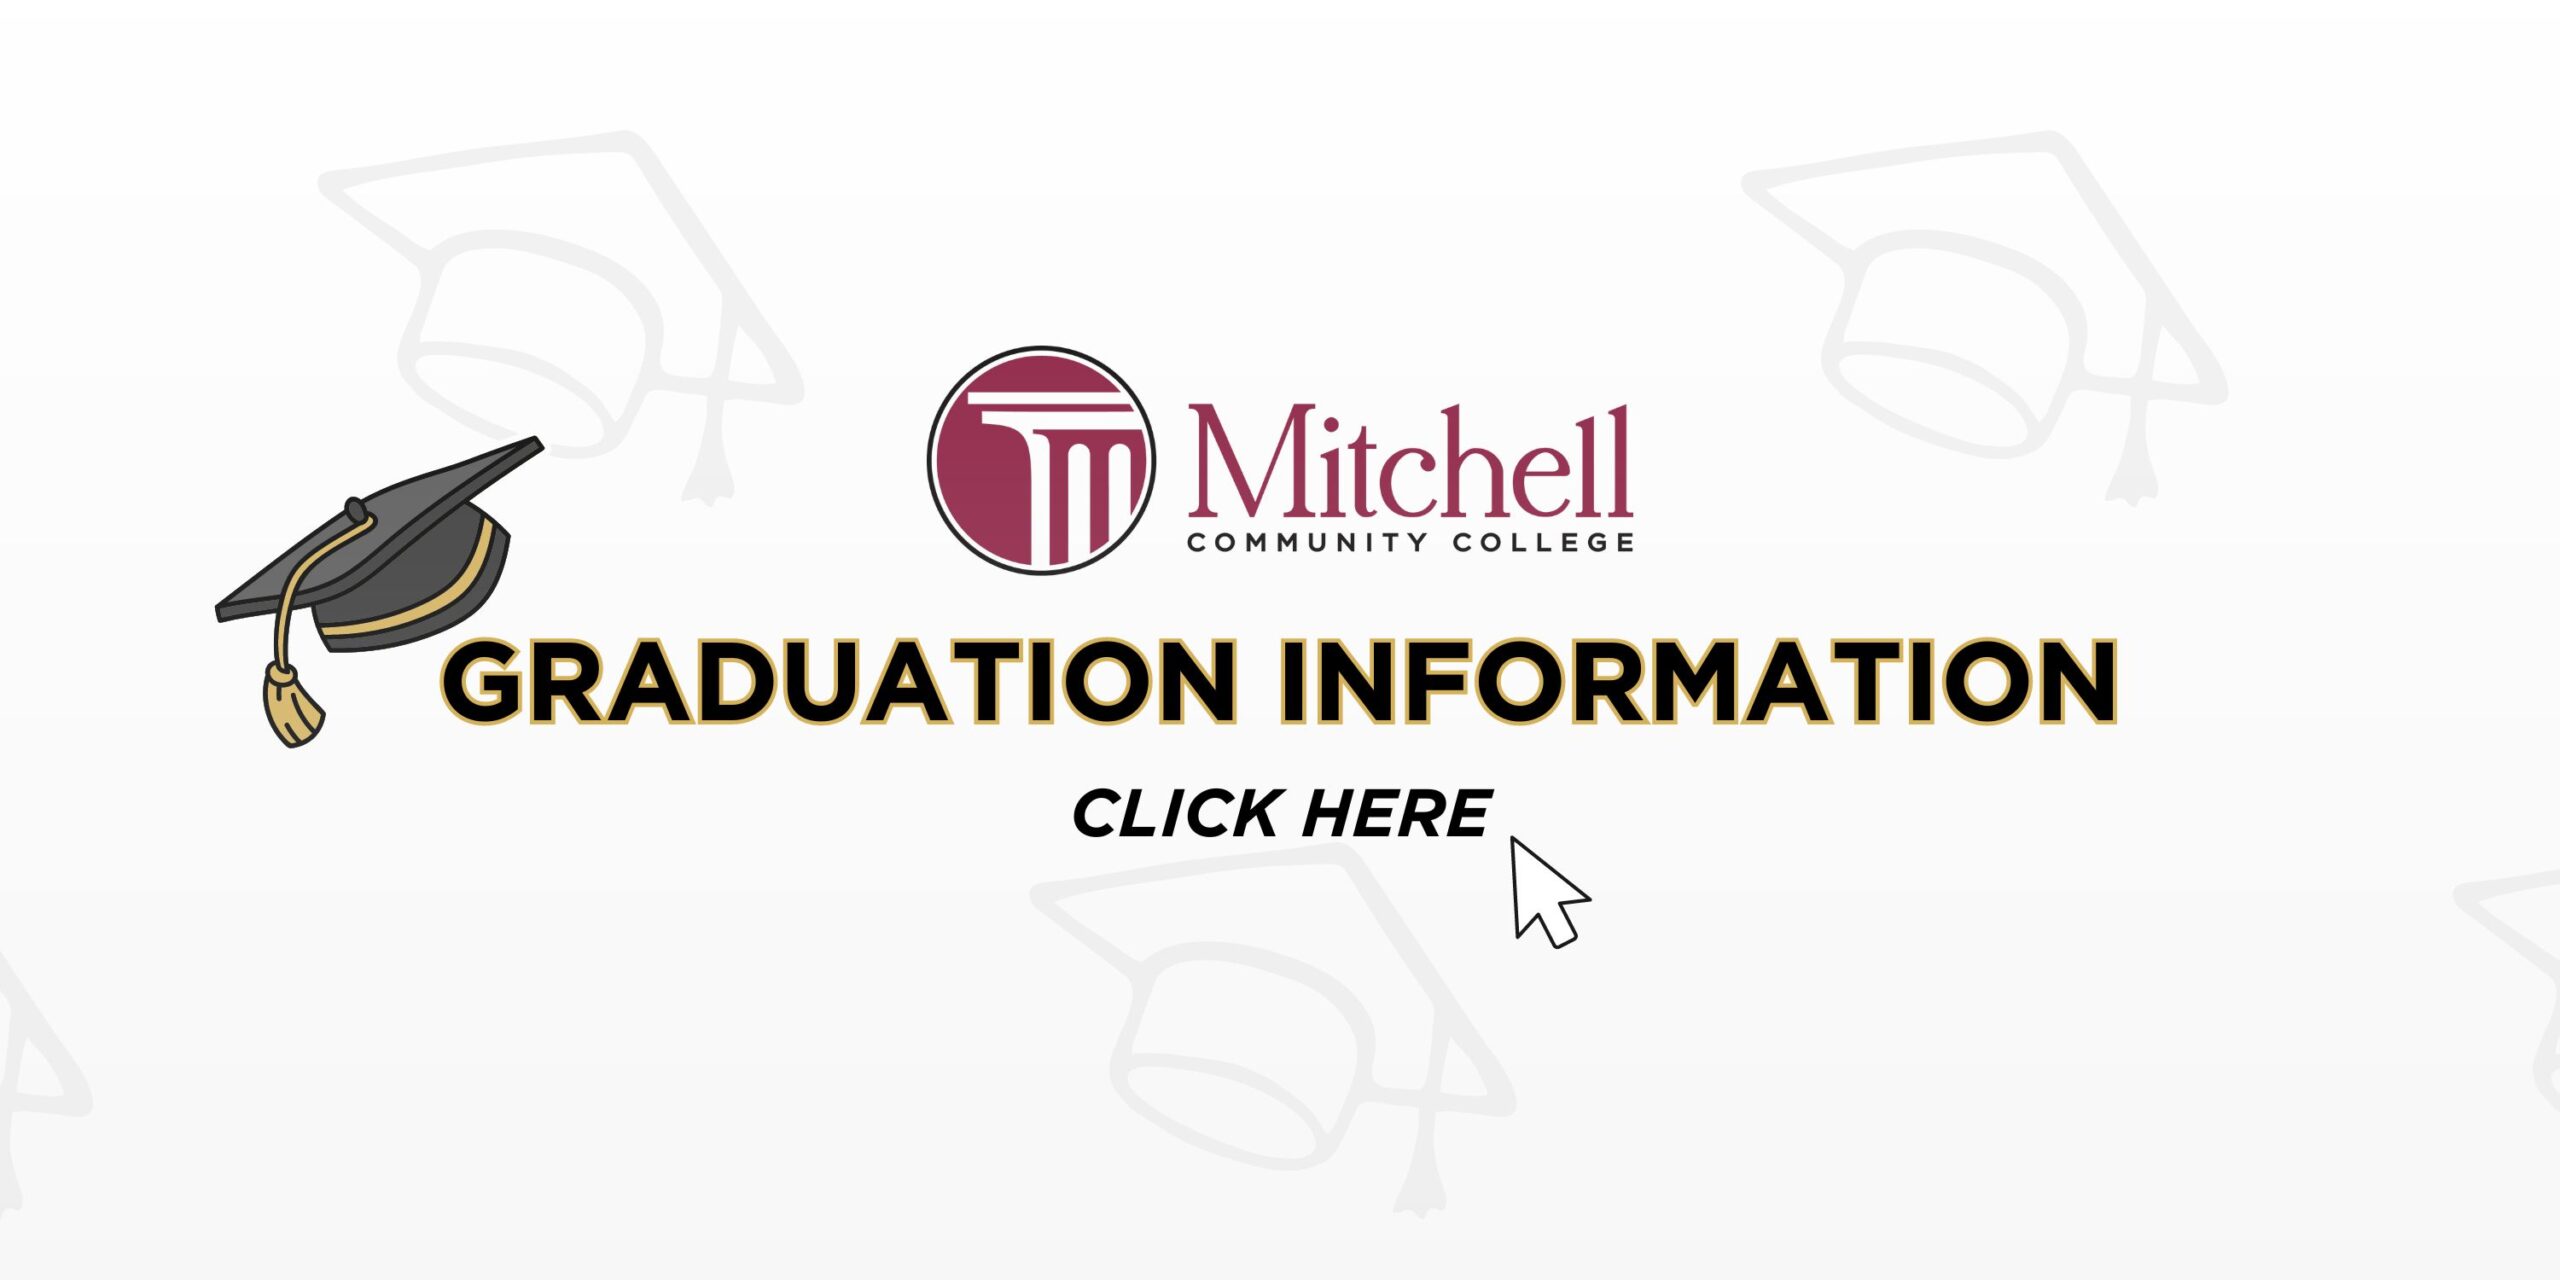 Click this banner to learn more about graduation information.